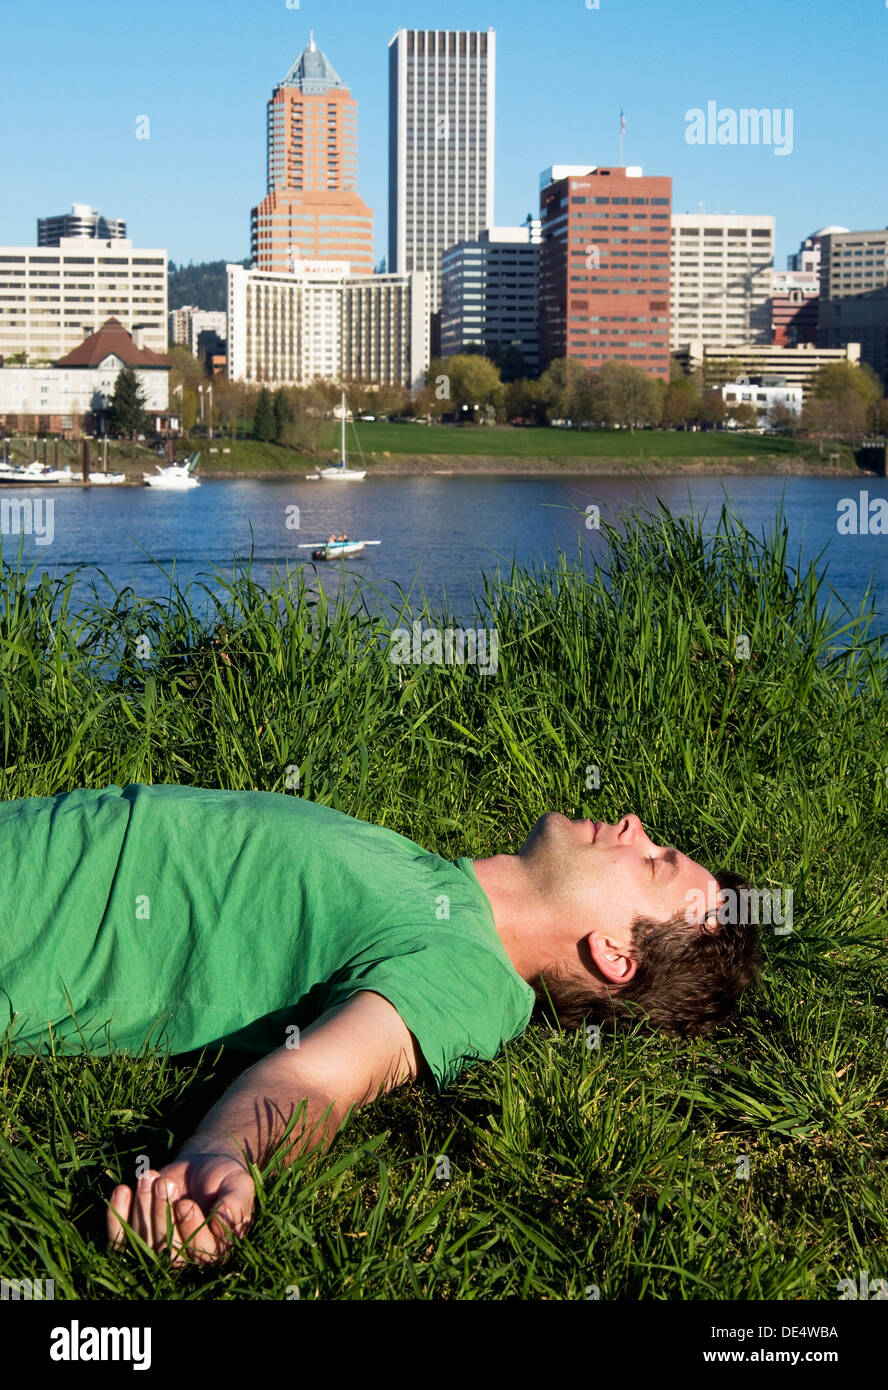 A man laying in the grass on the eastern bank of the willamette river in Portland, Oregon. Stock Photo